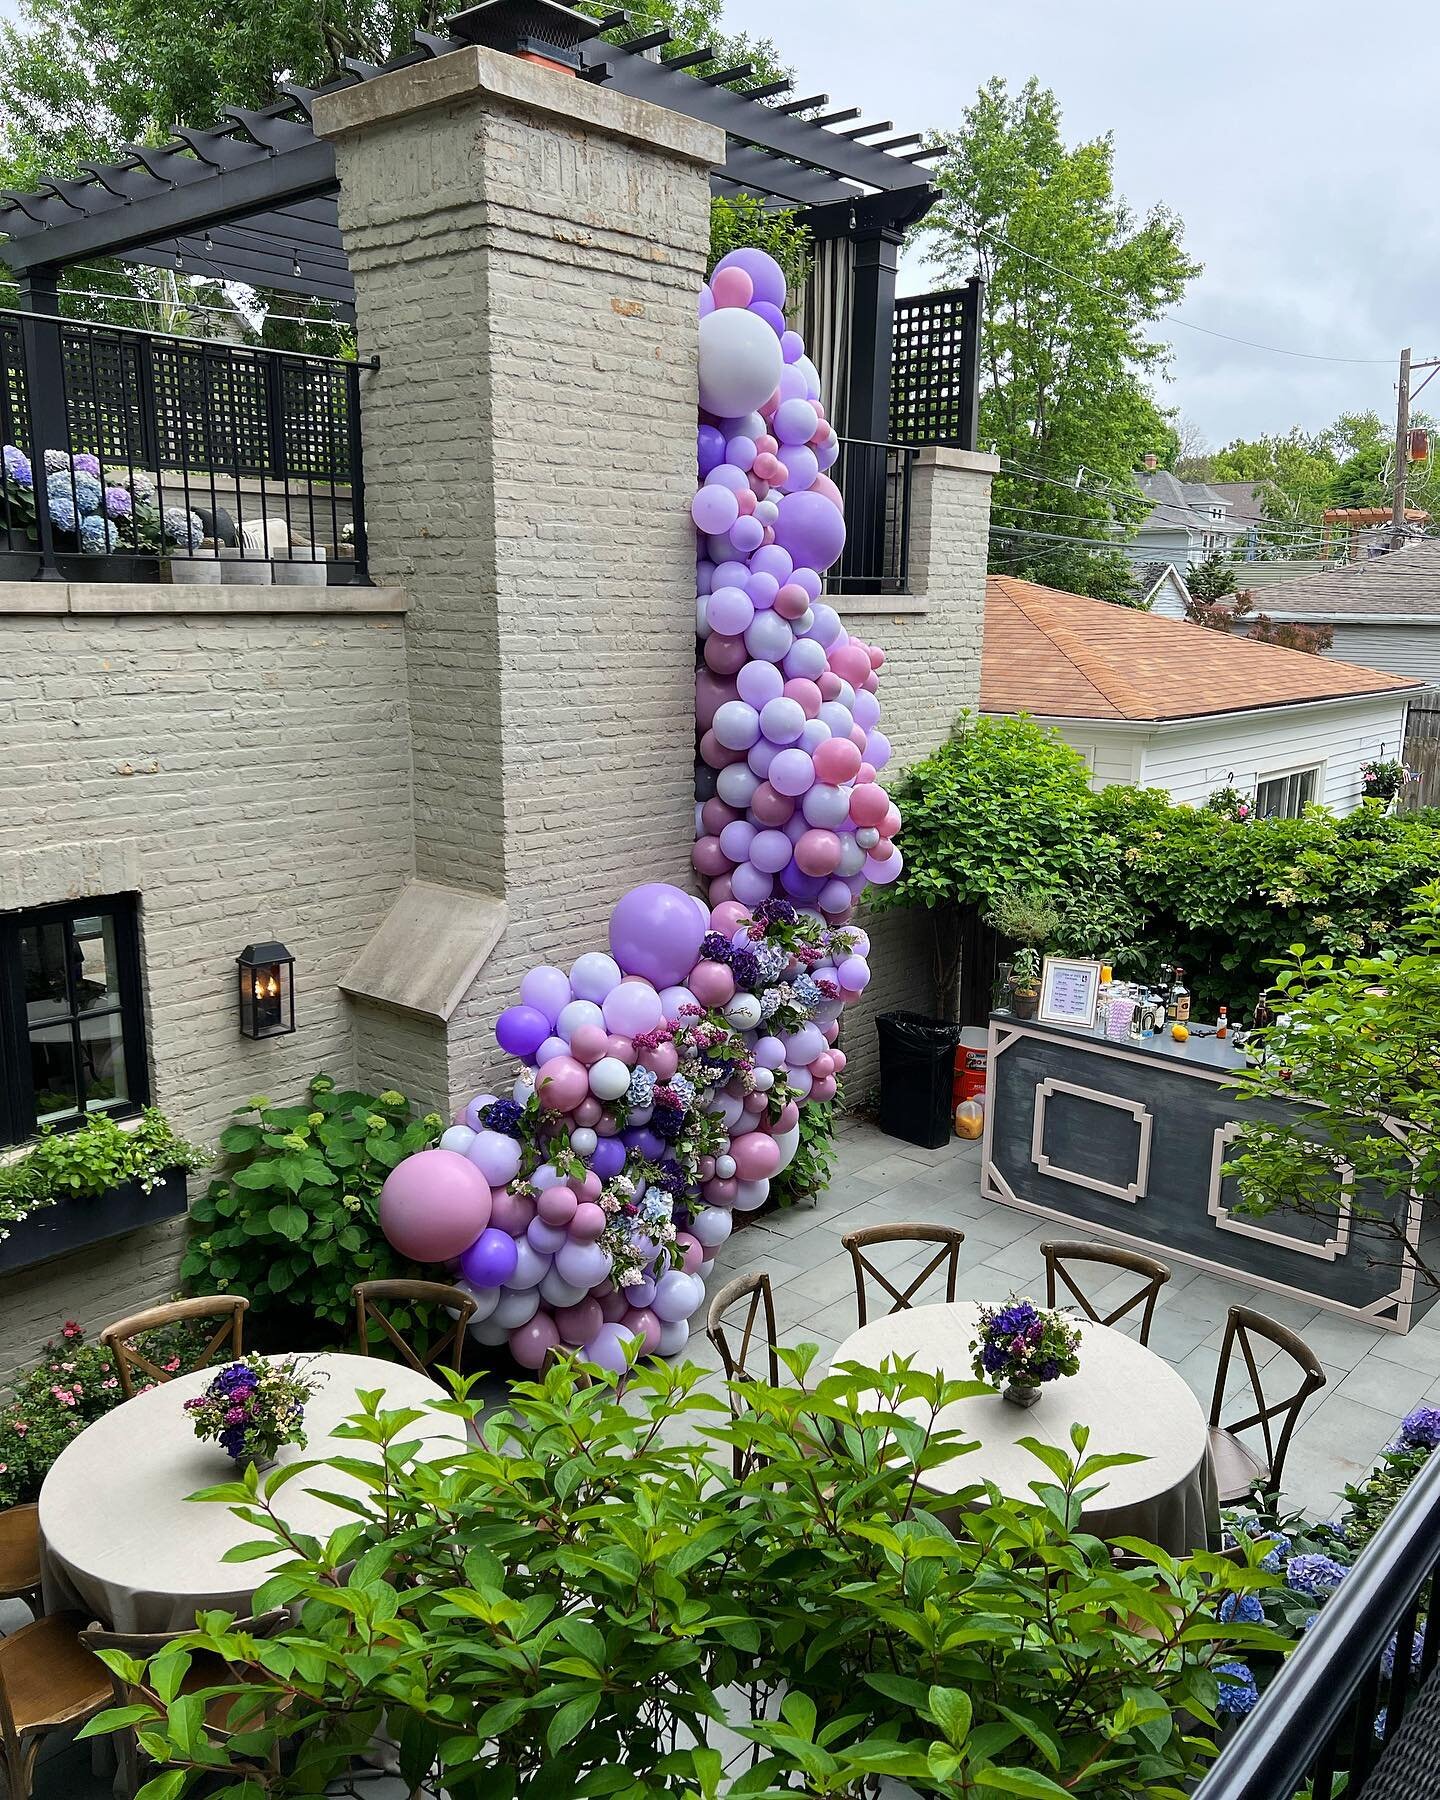 Purple isn&rsquo;t the easiest color to work with, but this just goes to show how fabulous it can be with the right balloons and floral, for this Northwestern Graduation party. (It really helps when the home gives us something fab to work with! 😉)

